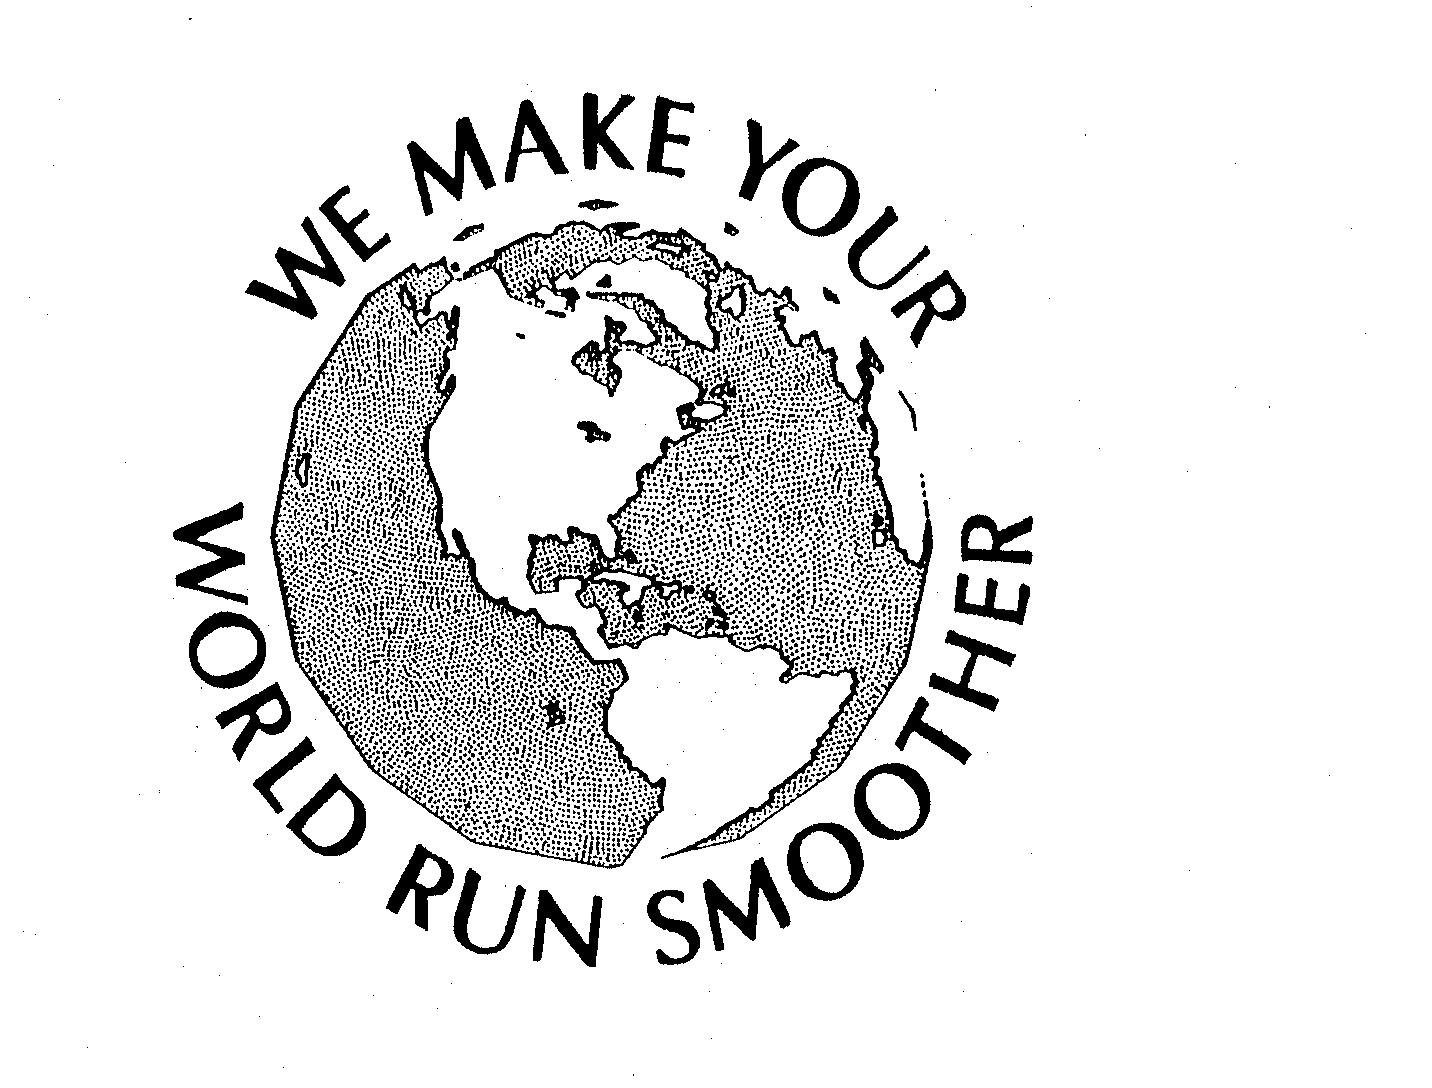  WE MAKE YOUR WORLD RUN SMOOTHER